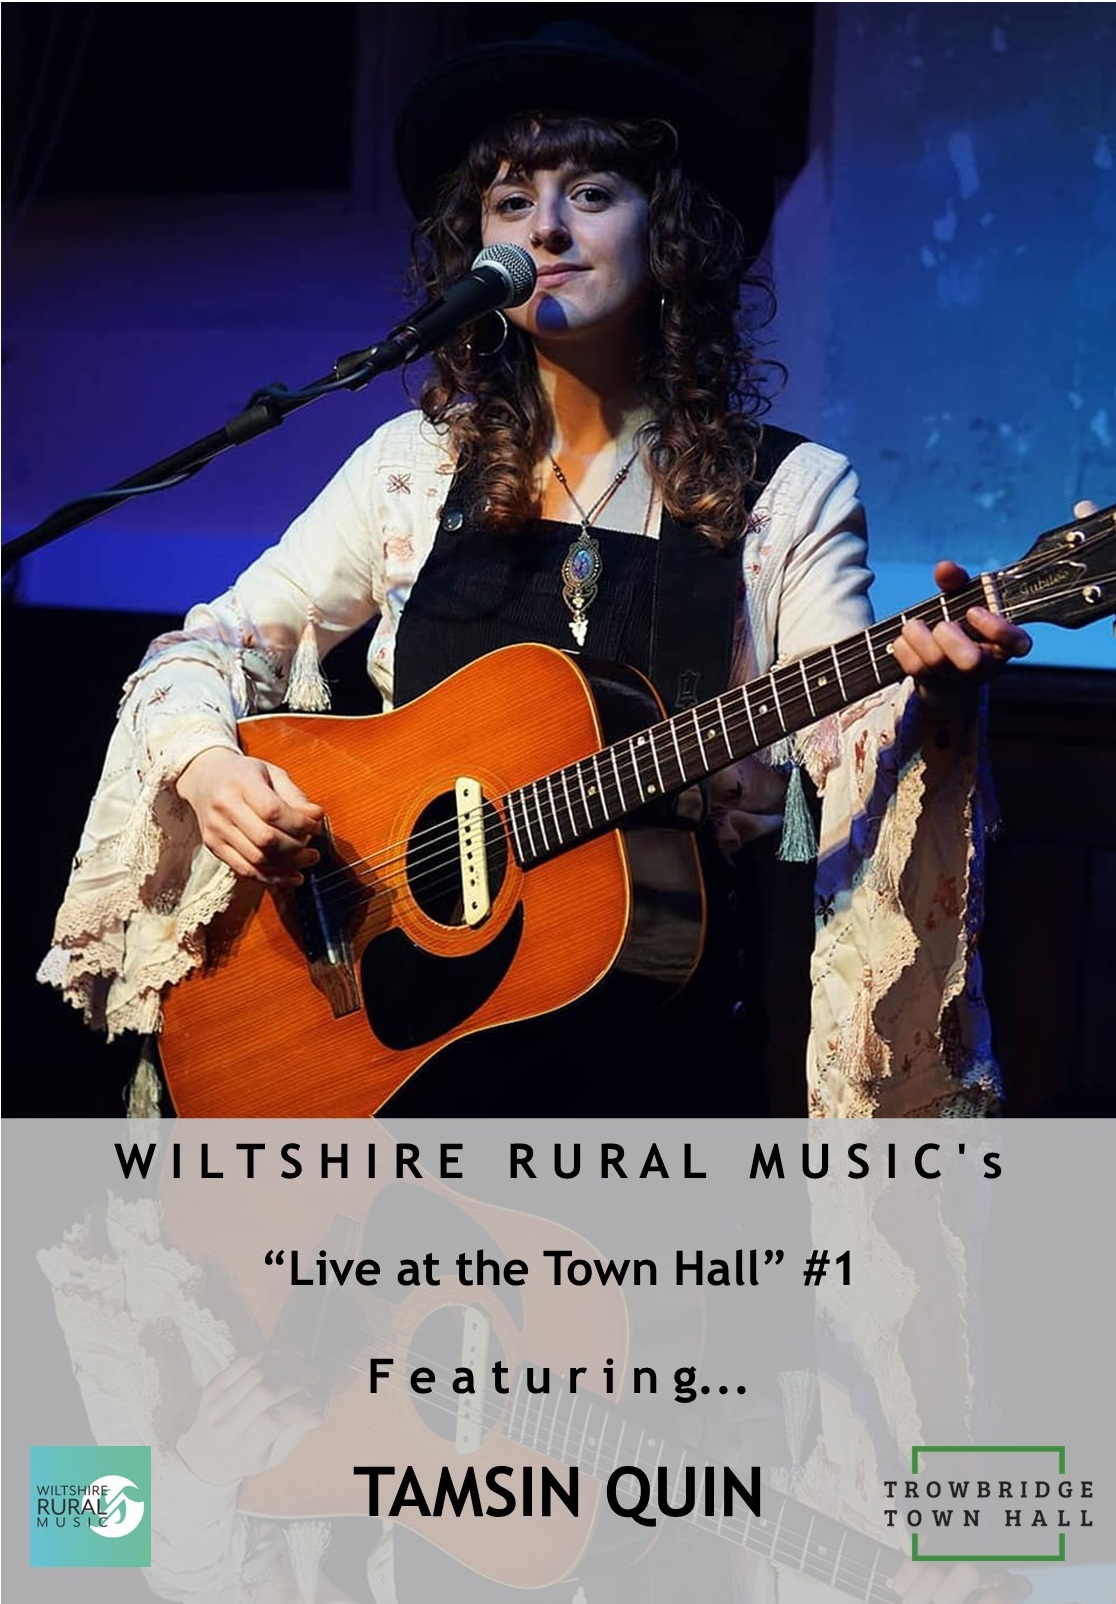 Live at the Town Hall #1 – Tamsin Quin